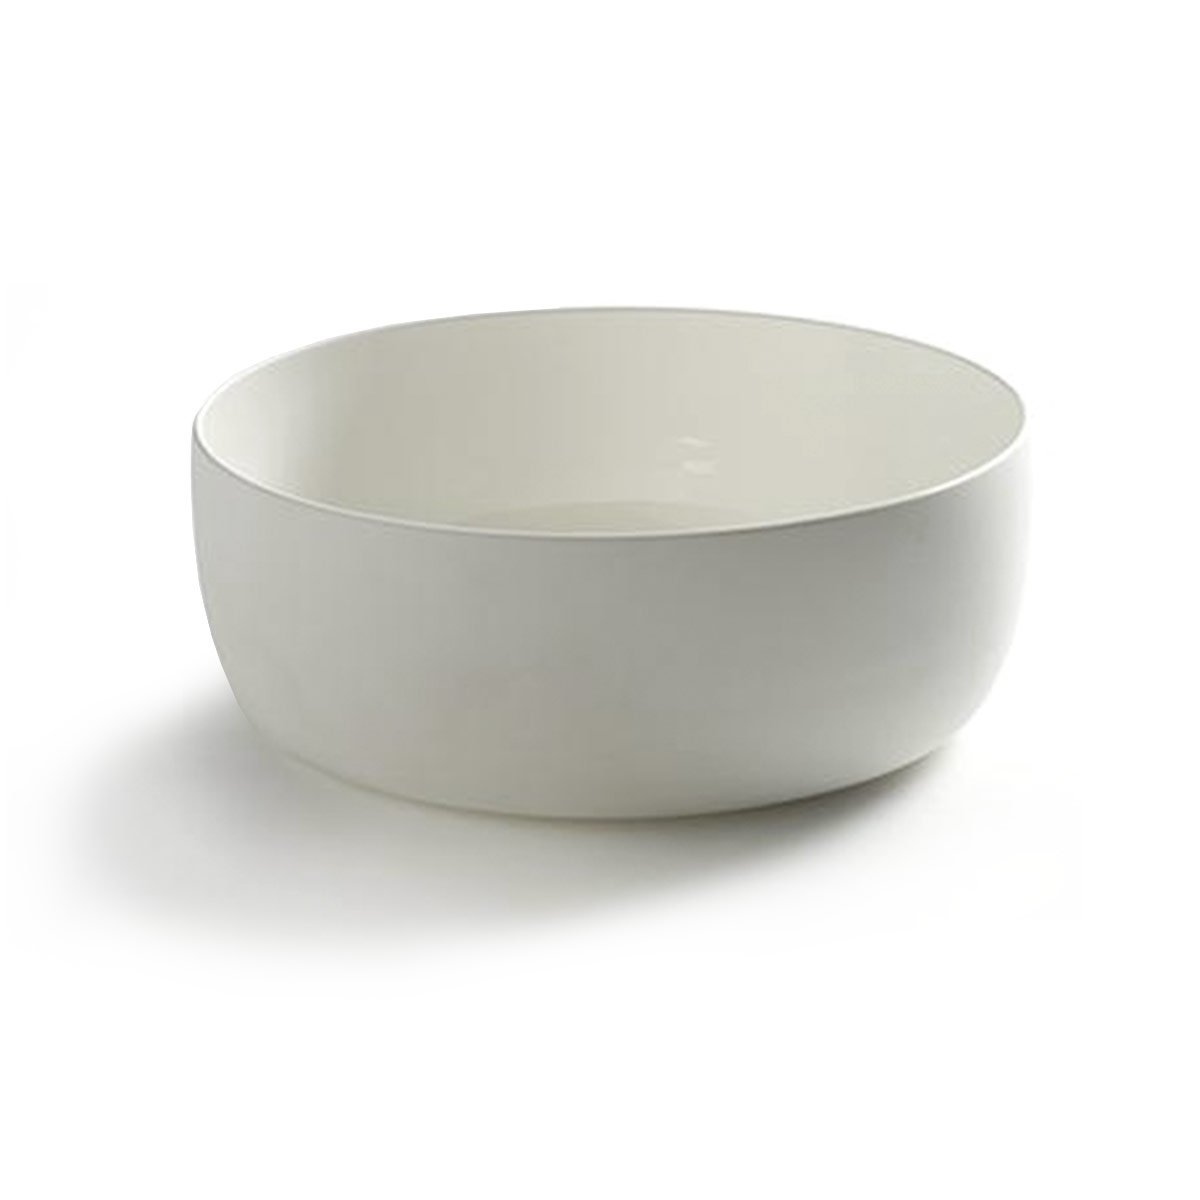 Piet Boon High Bowl, Large